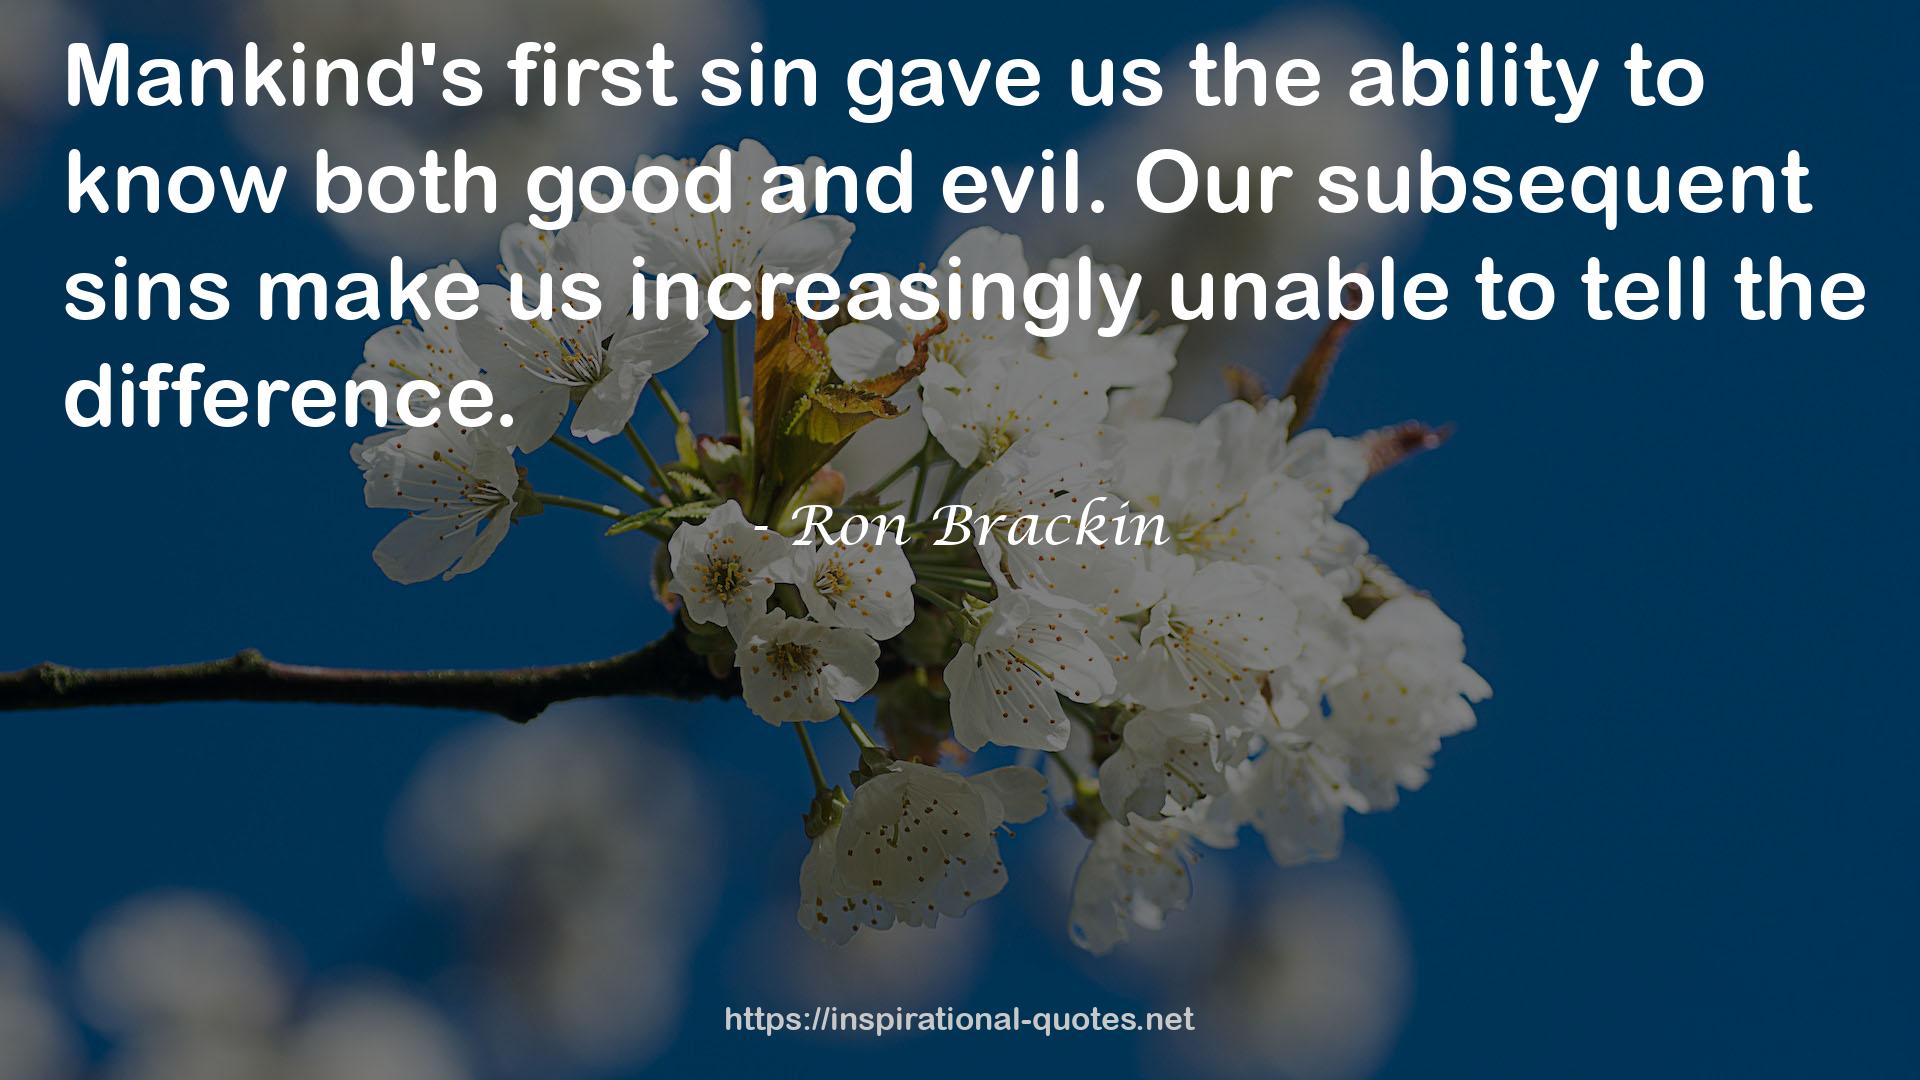 Our subsequent sins  QUOTES